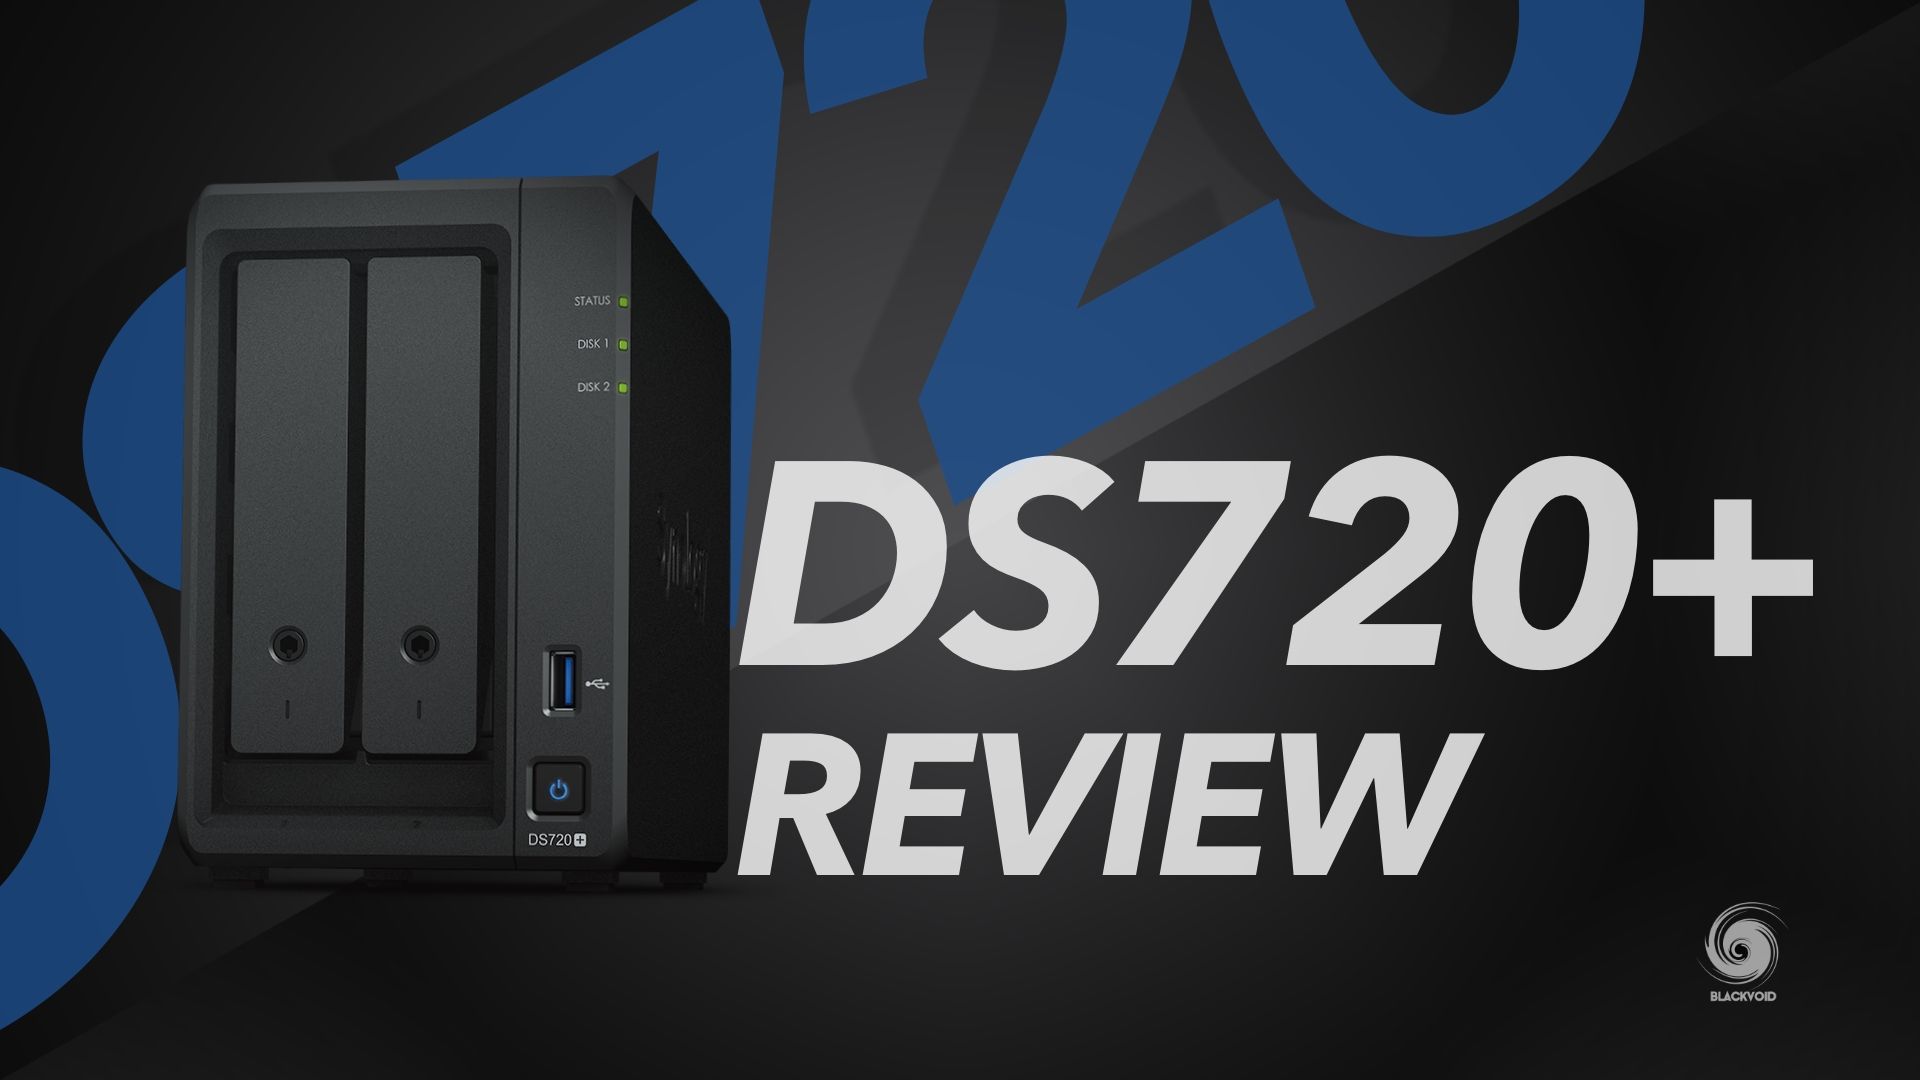 DS720+ running with DSM 7.1 - review